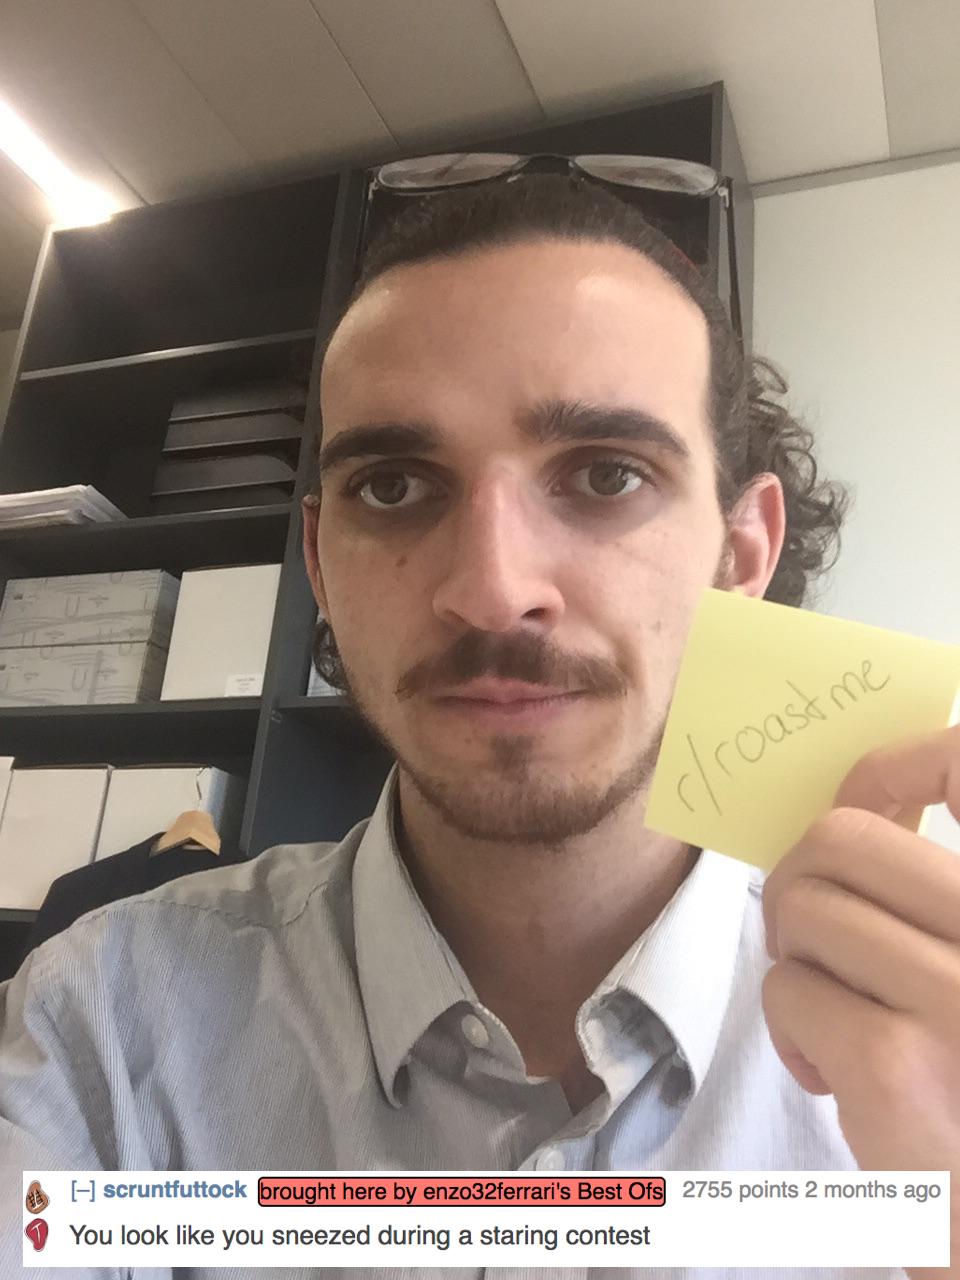 roasted roast me best - croast me scruntfuttock brought here by enzo32ferrari's Best Ofs 2755 points 2 months ago You look you sneezed during a staring contest